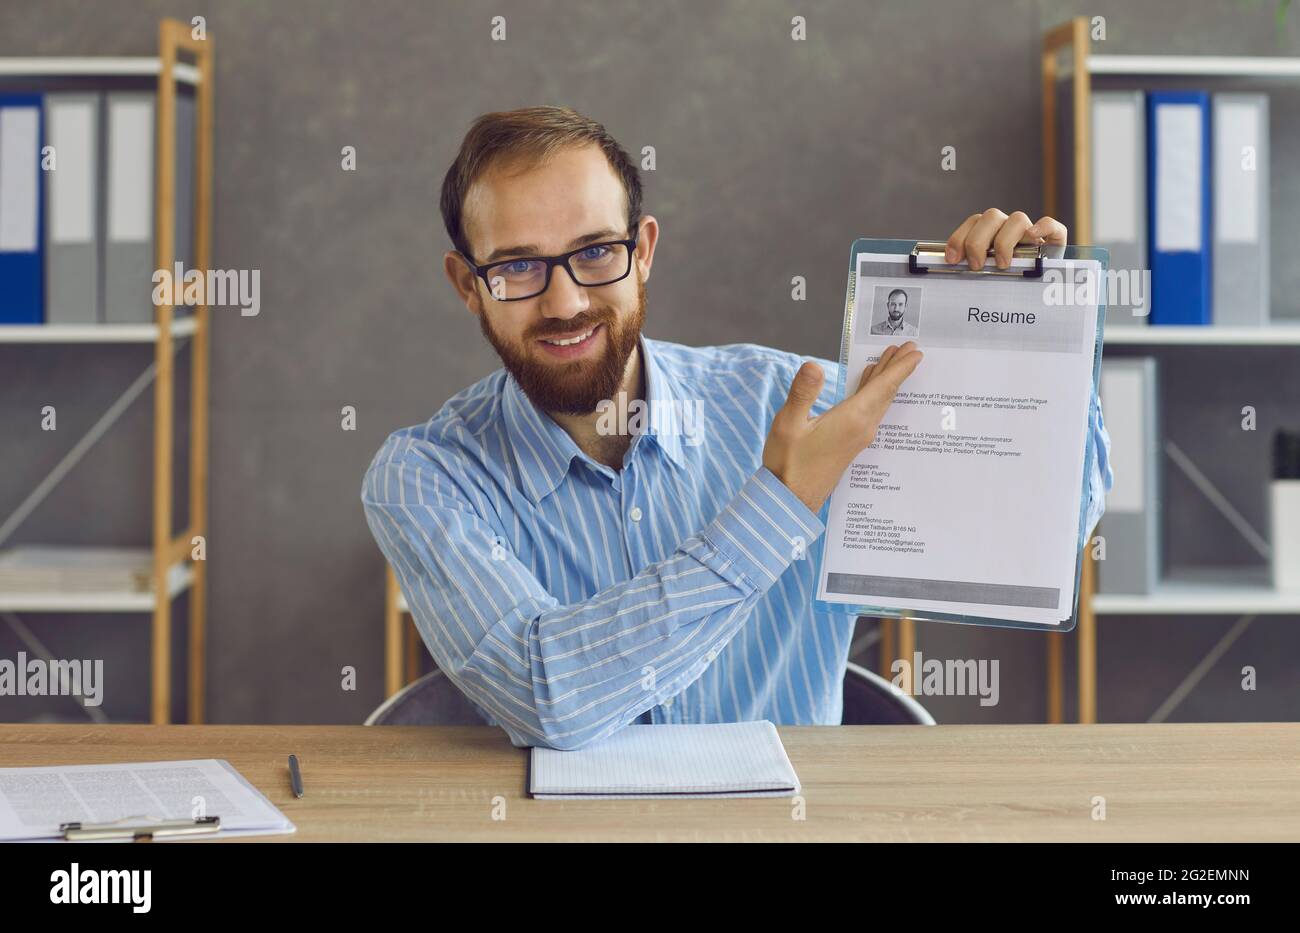 Unemployed man or professional career advisor shows a printed version of a resume Stock Photo